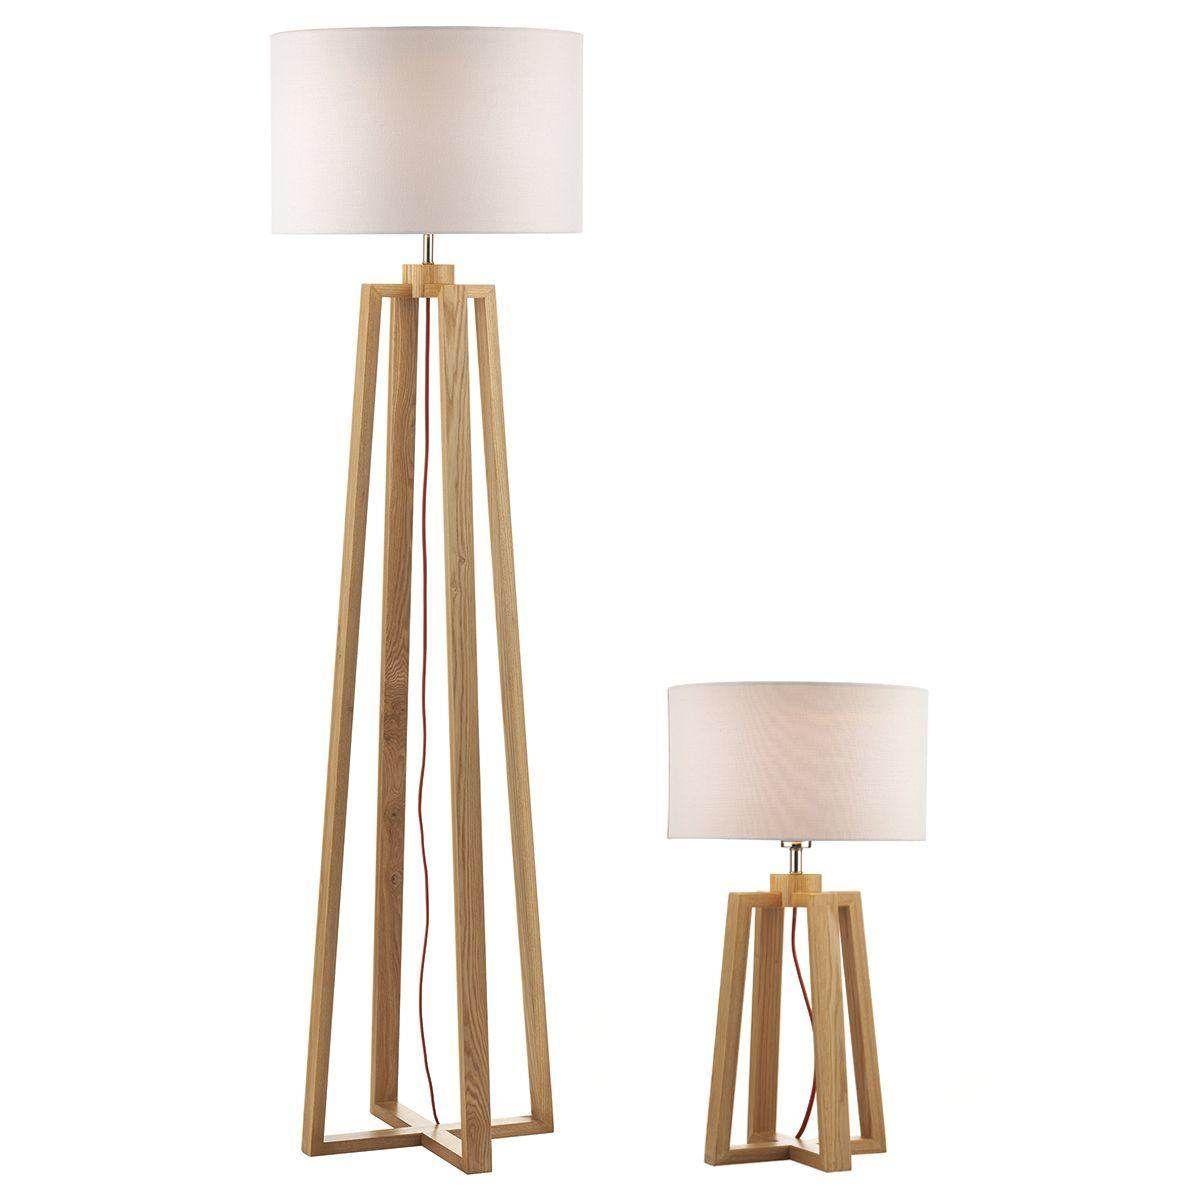 Dar Pyramid Table & Floor Twin Pack Comes With Shades - Cusack Lighting